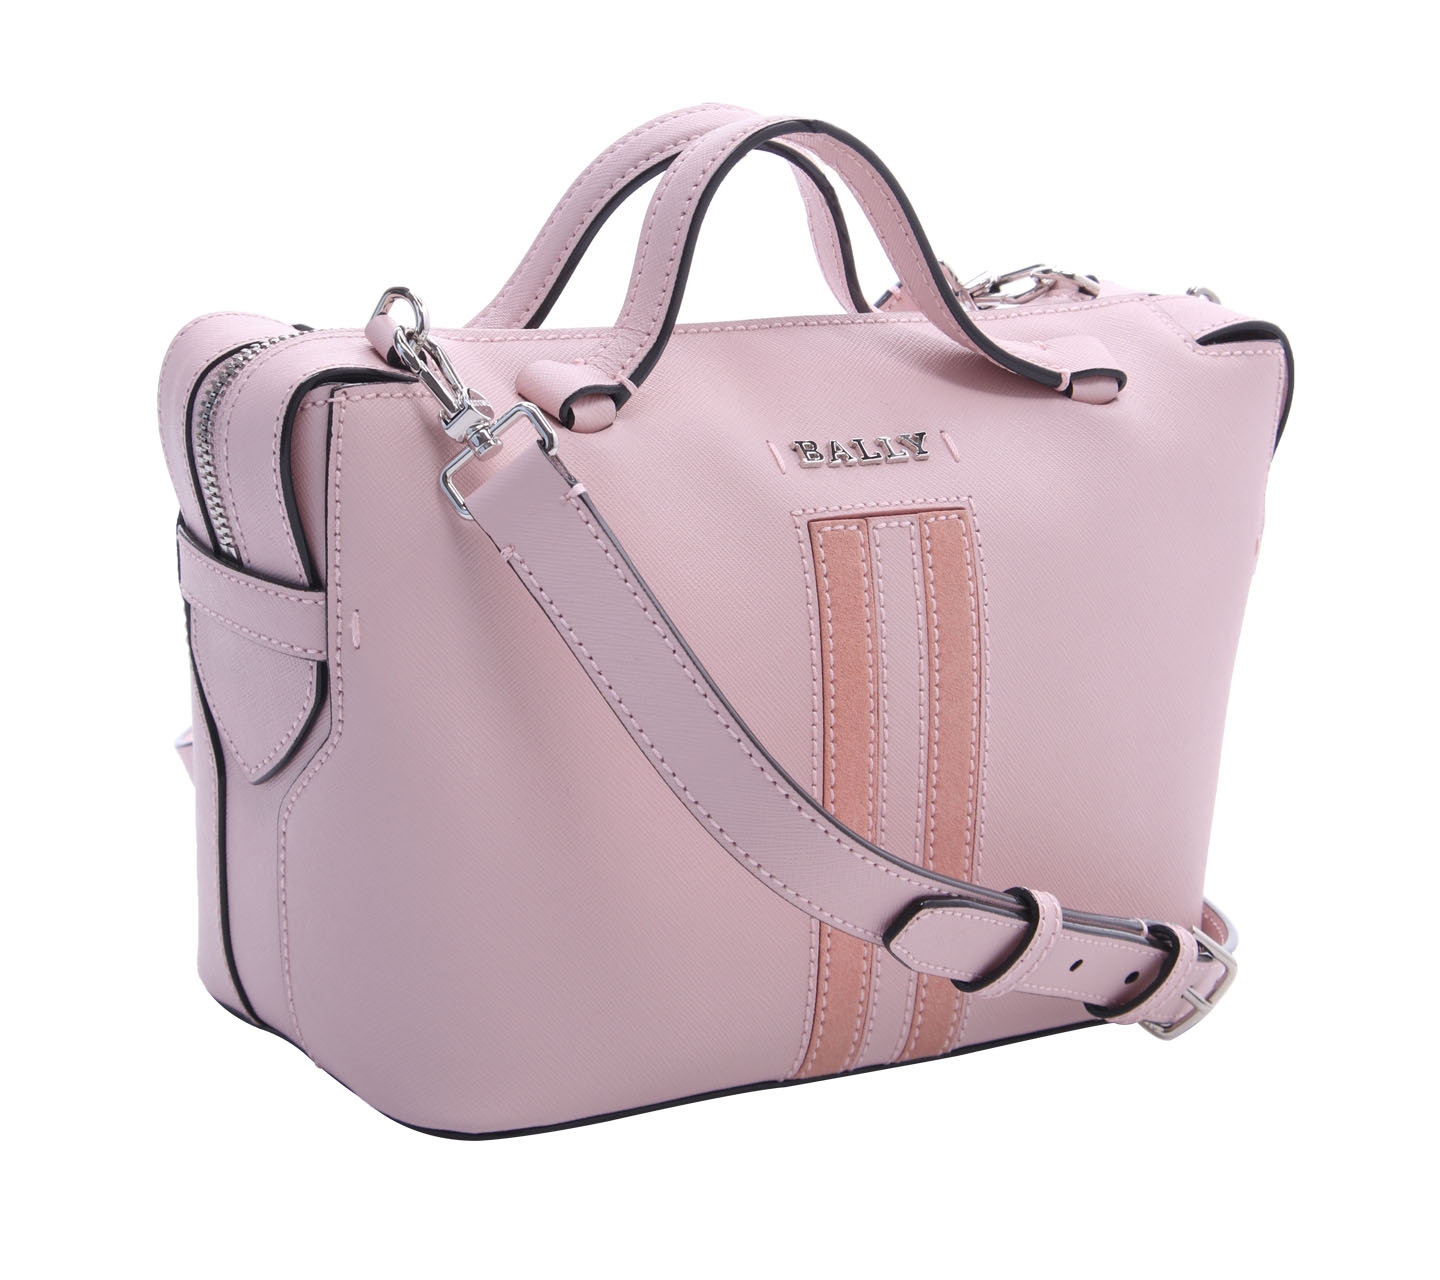 Bally Pink Leather Satchel